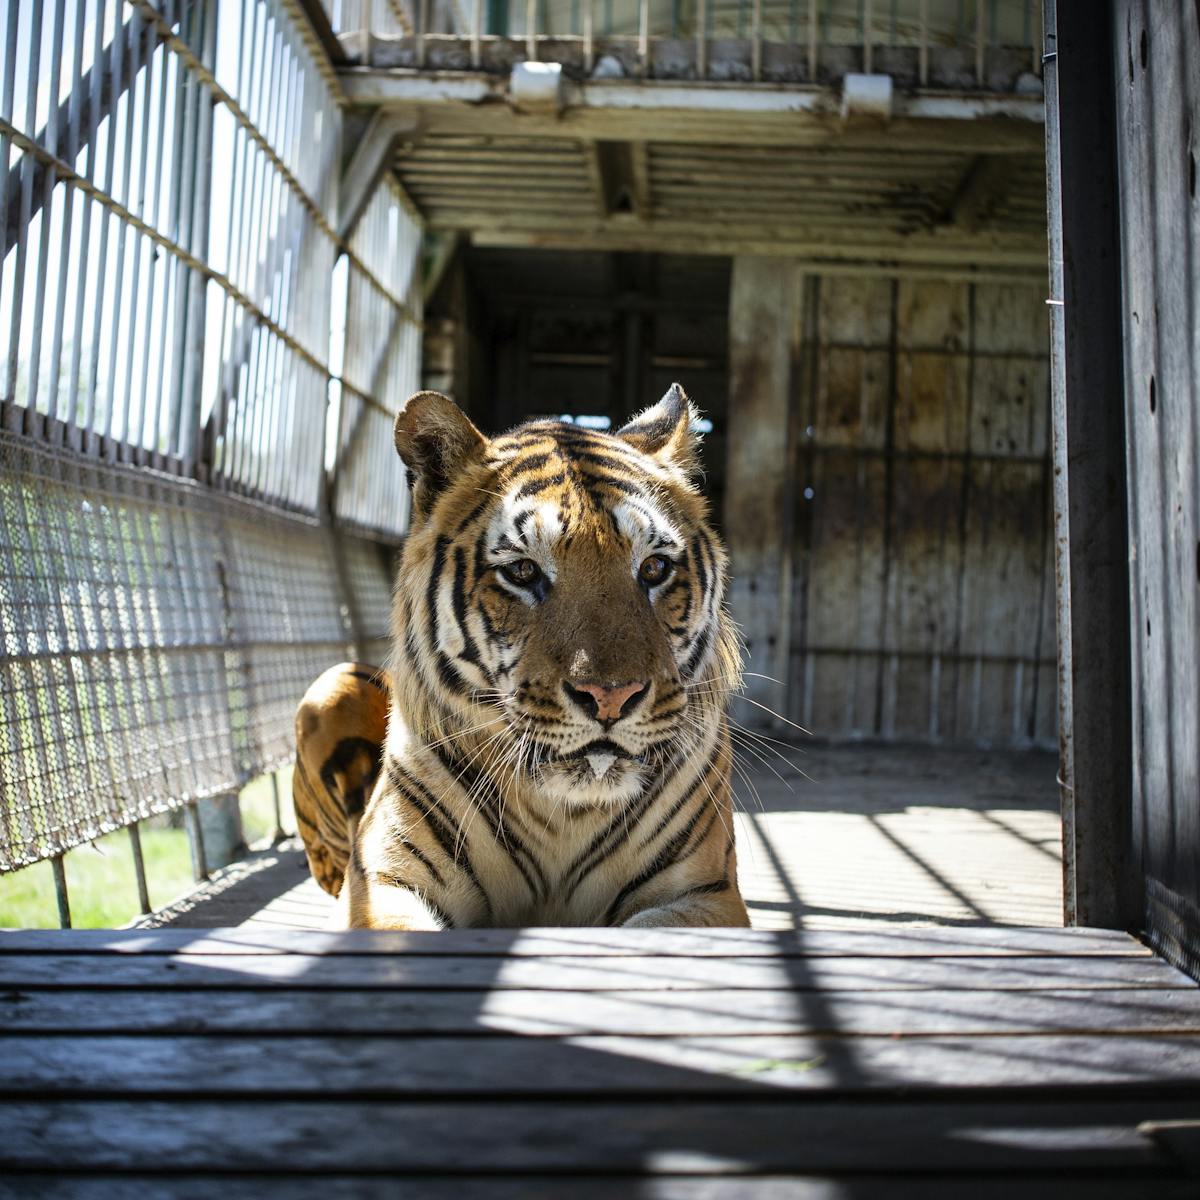 Tigers in South Africa: a farming industry exists – often for their body  parts